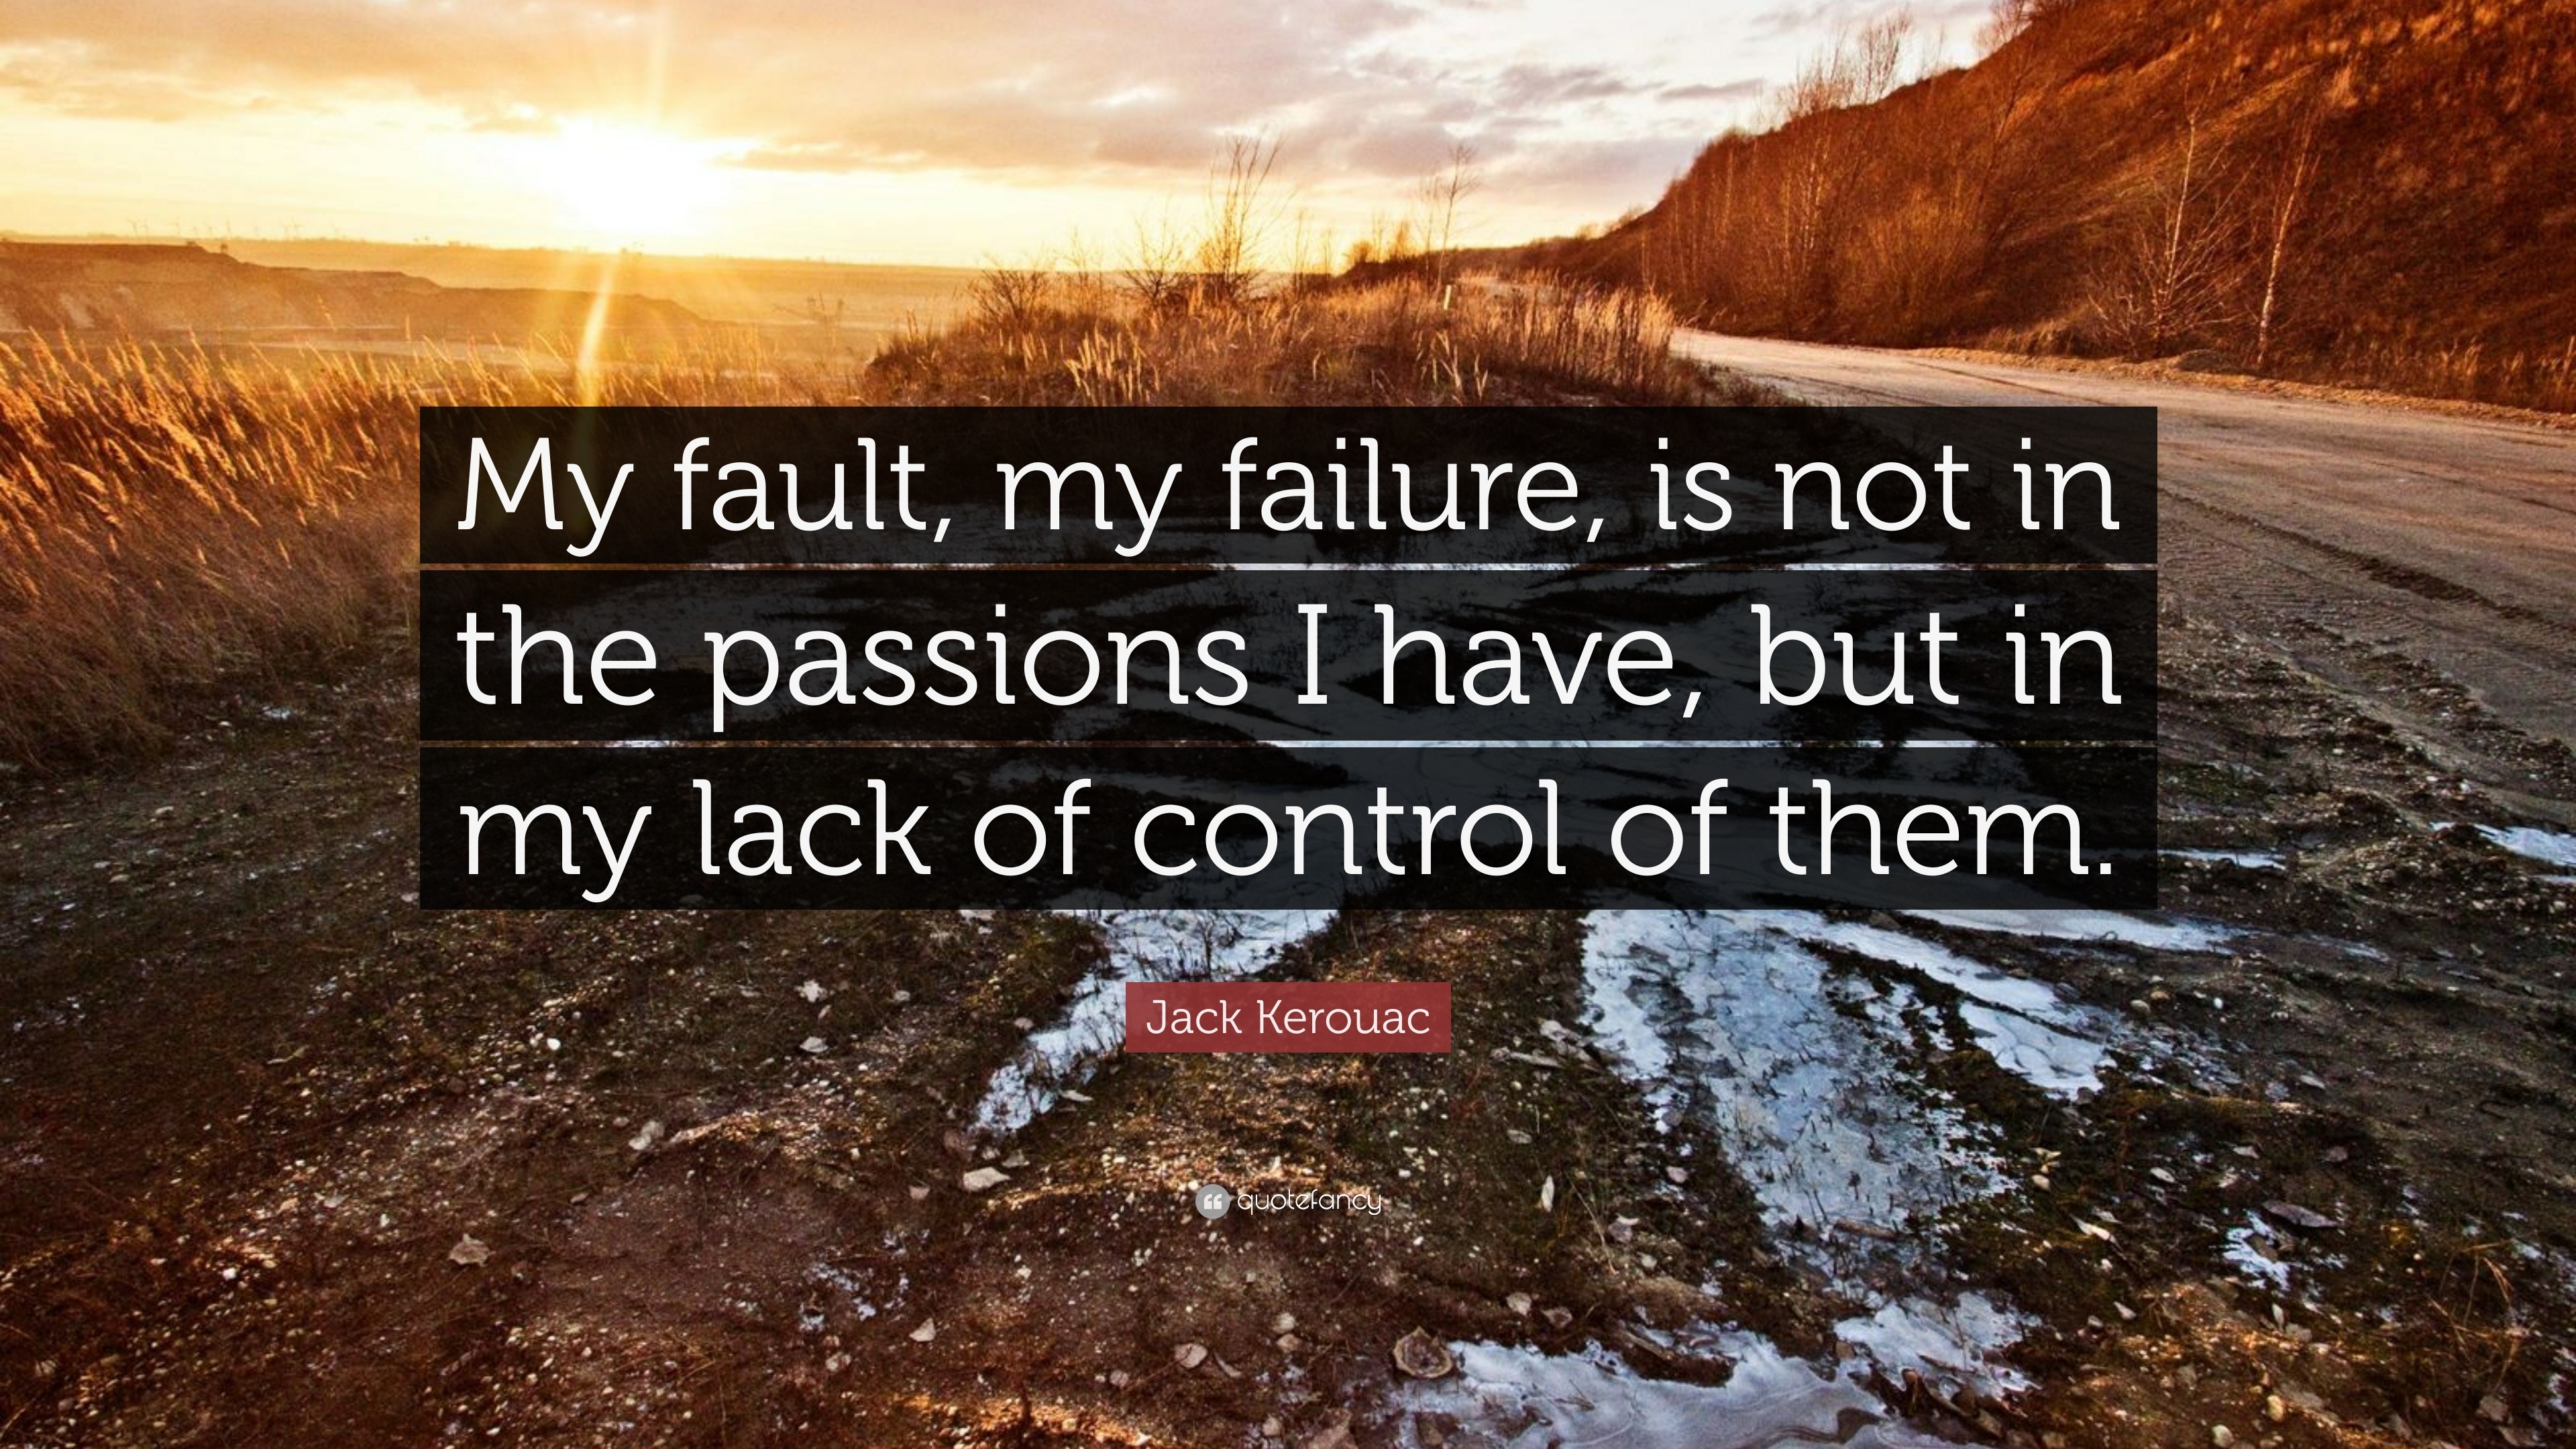 Jack Kerouac Quote “my Fault My Failure Is Not In The Passions I Have But In My Lack Of